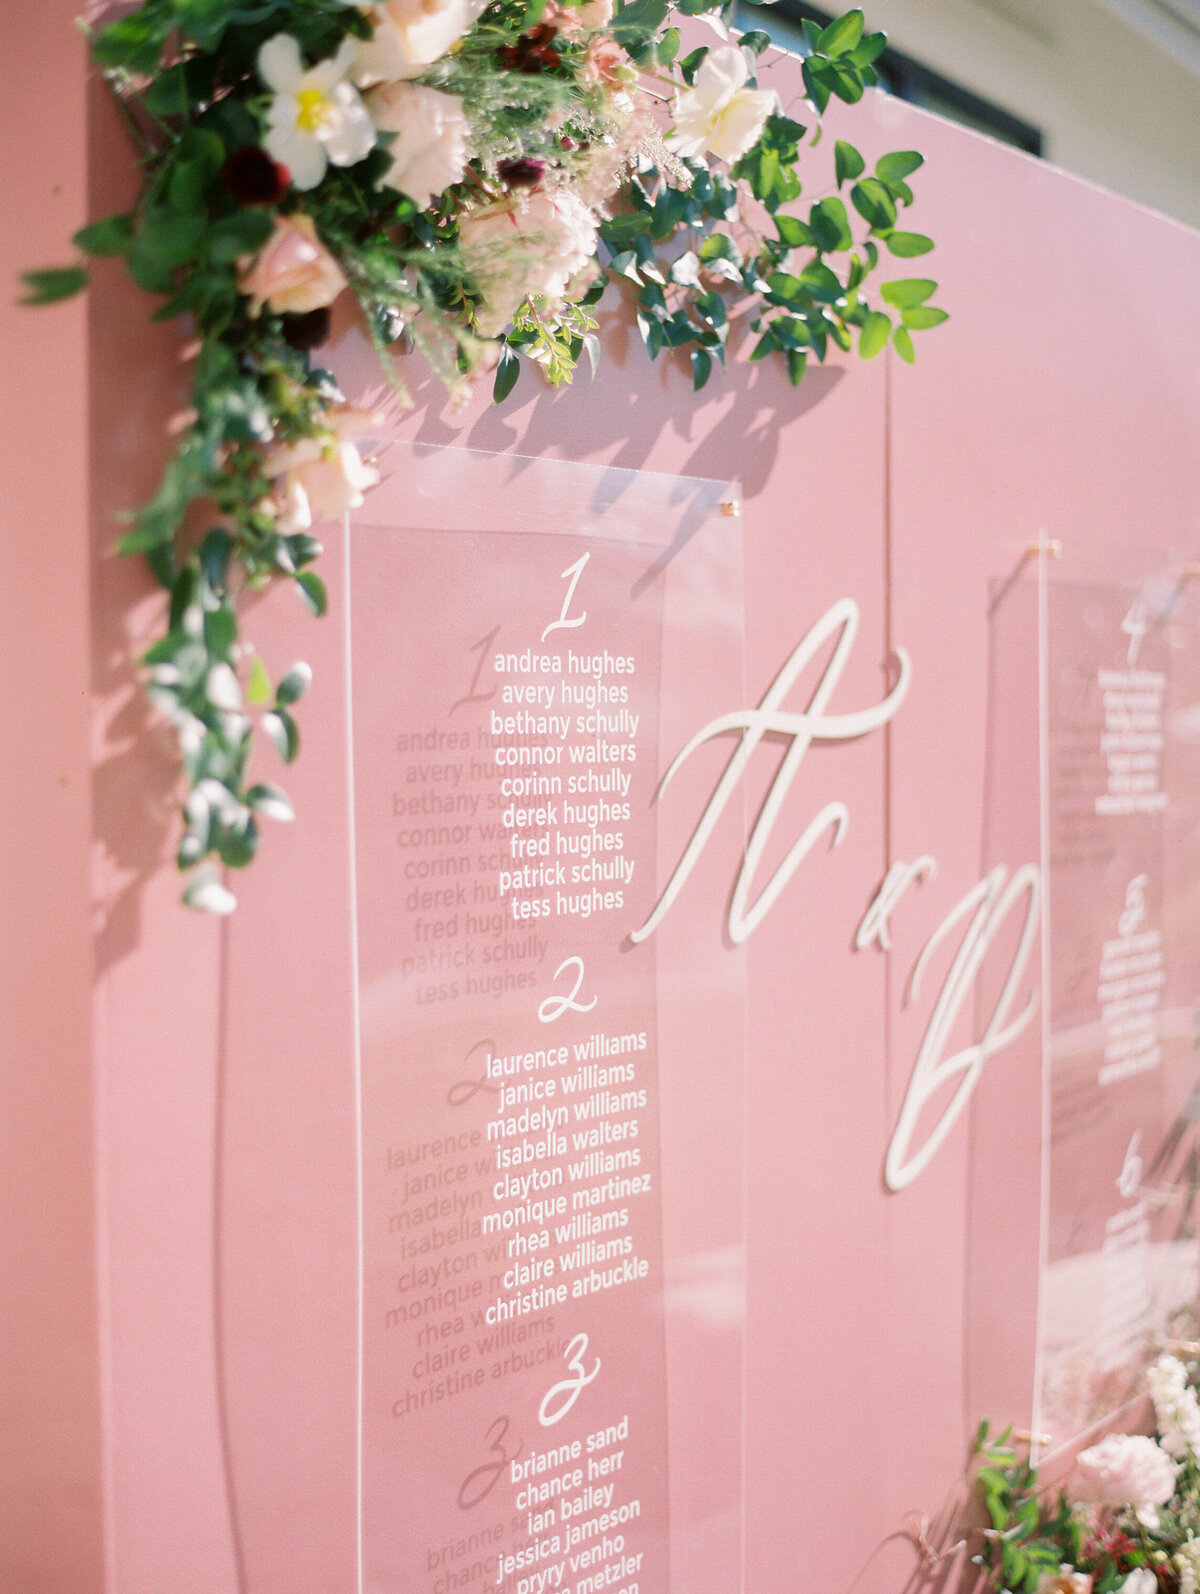 LBV Design House Wedding Design Planning Day-Of Signage Paper Goods Shoppable Accessories Wedding Day Austin, Texas beyond Valerie Strenk Lettered by Valerie Hand Lettering16